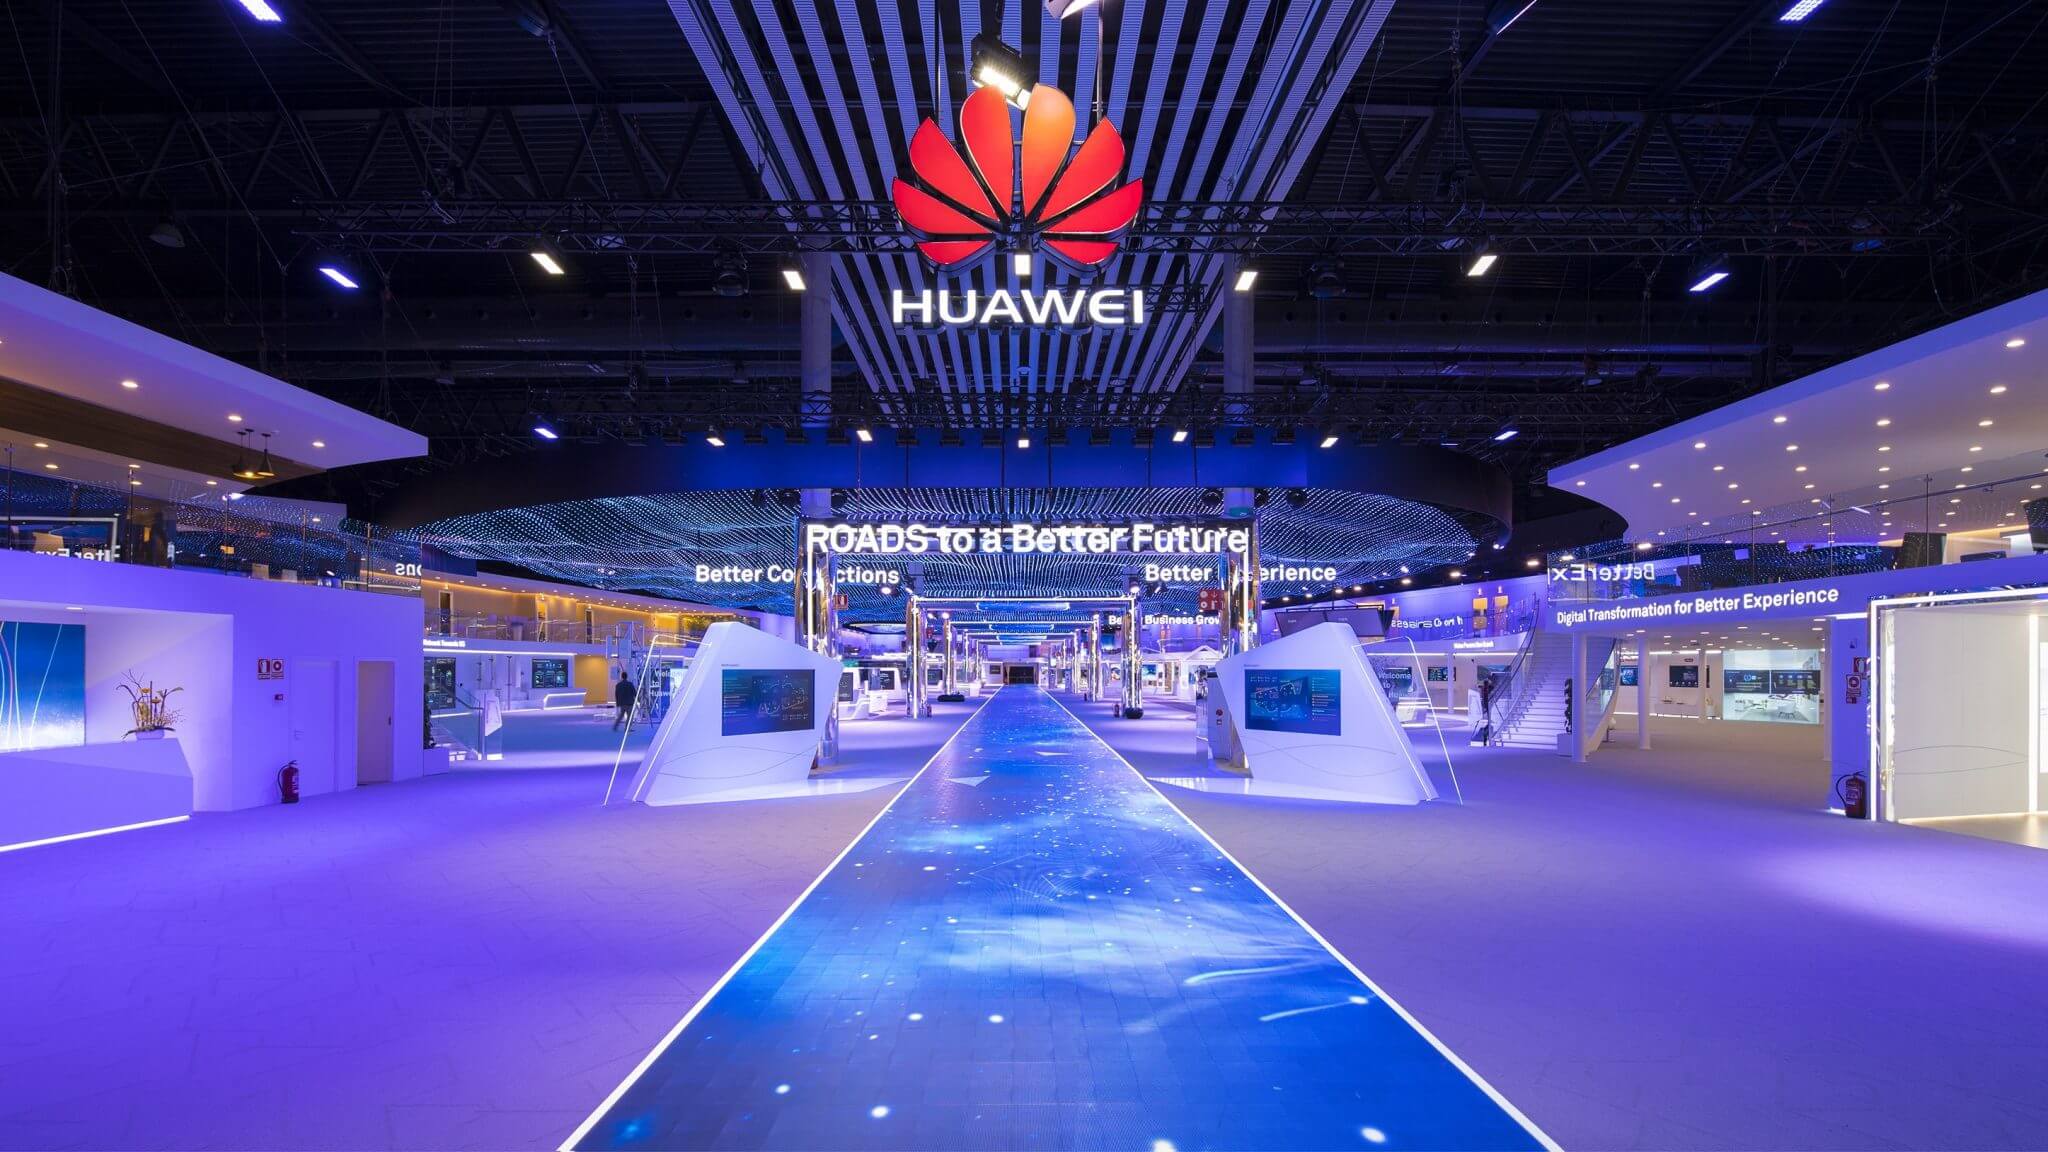 Trump administration puts Huawei licenses on hold as China tensions increase